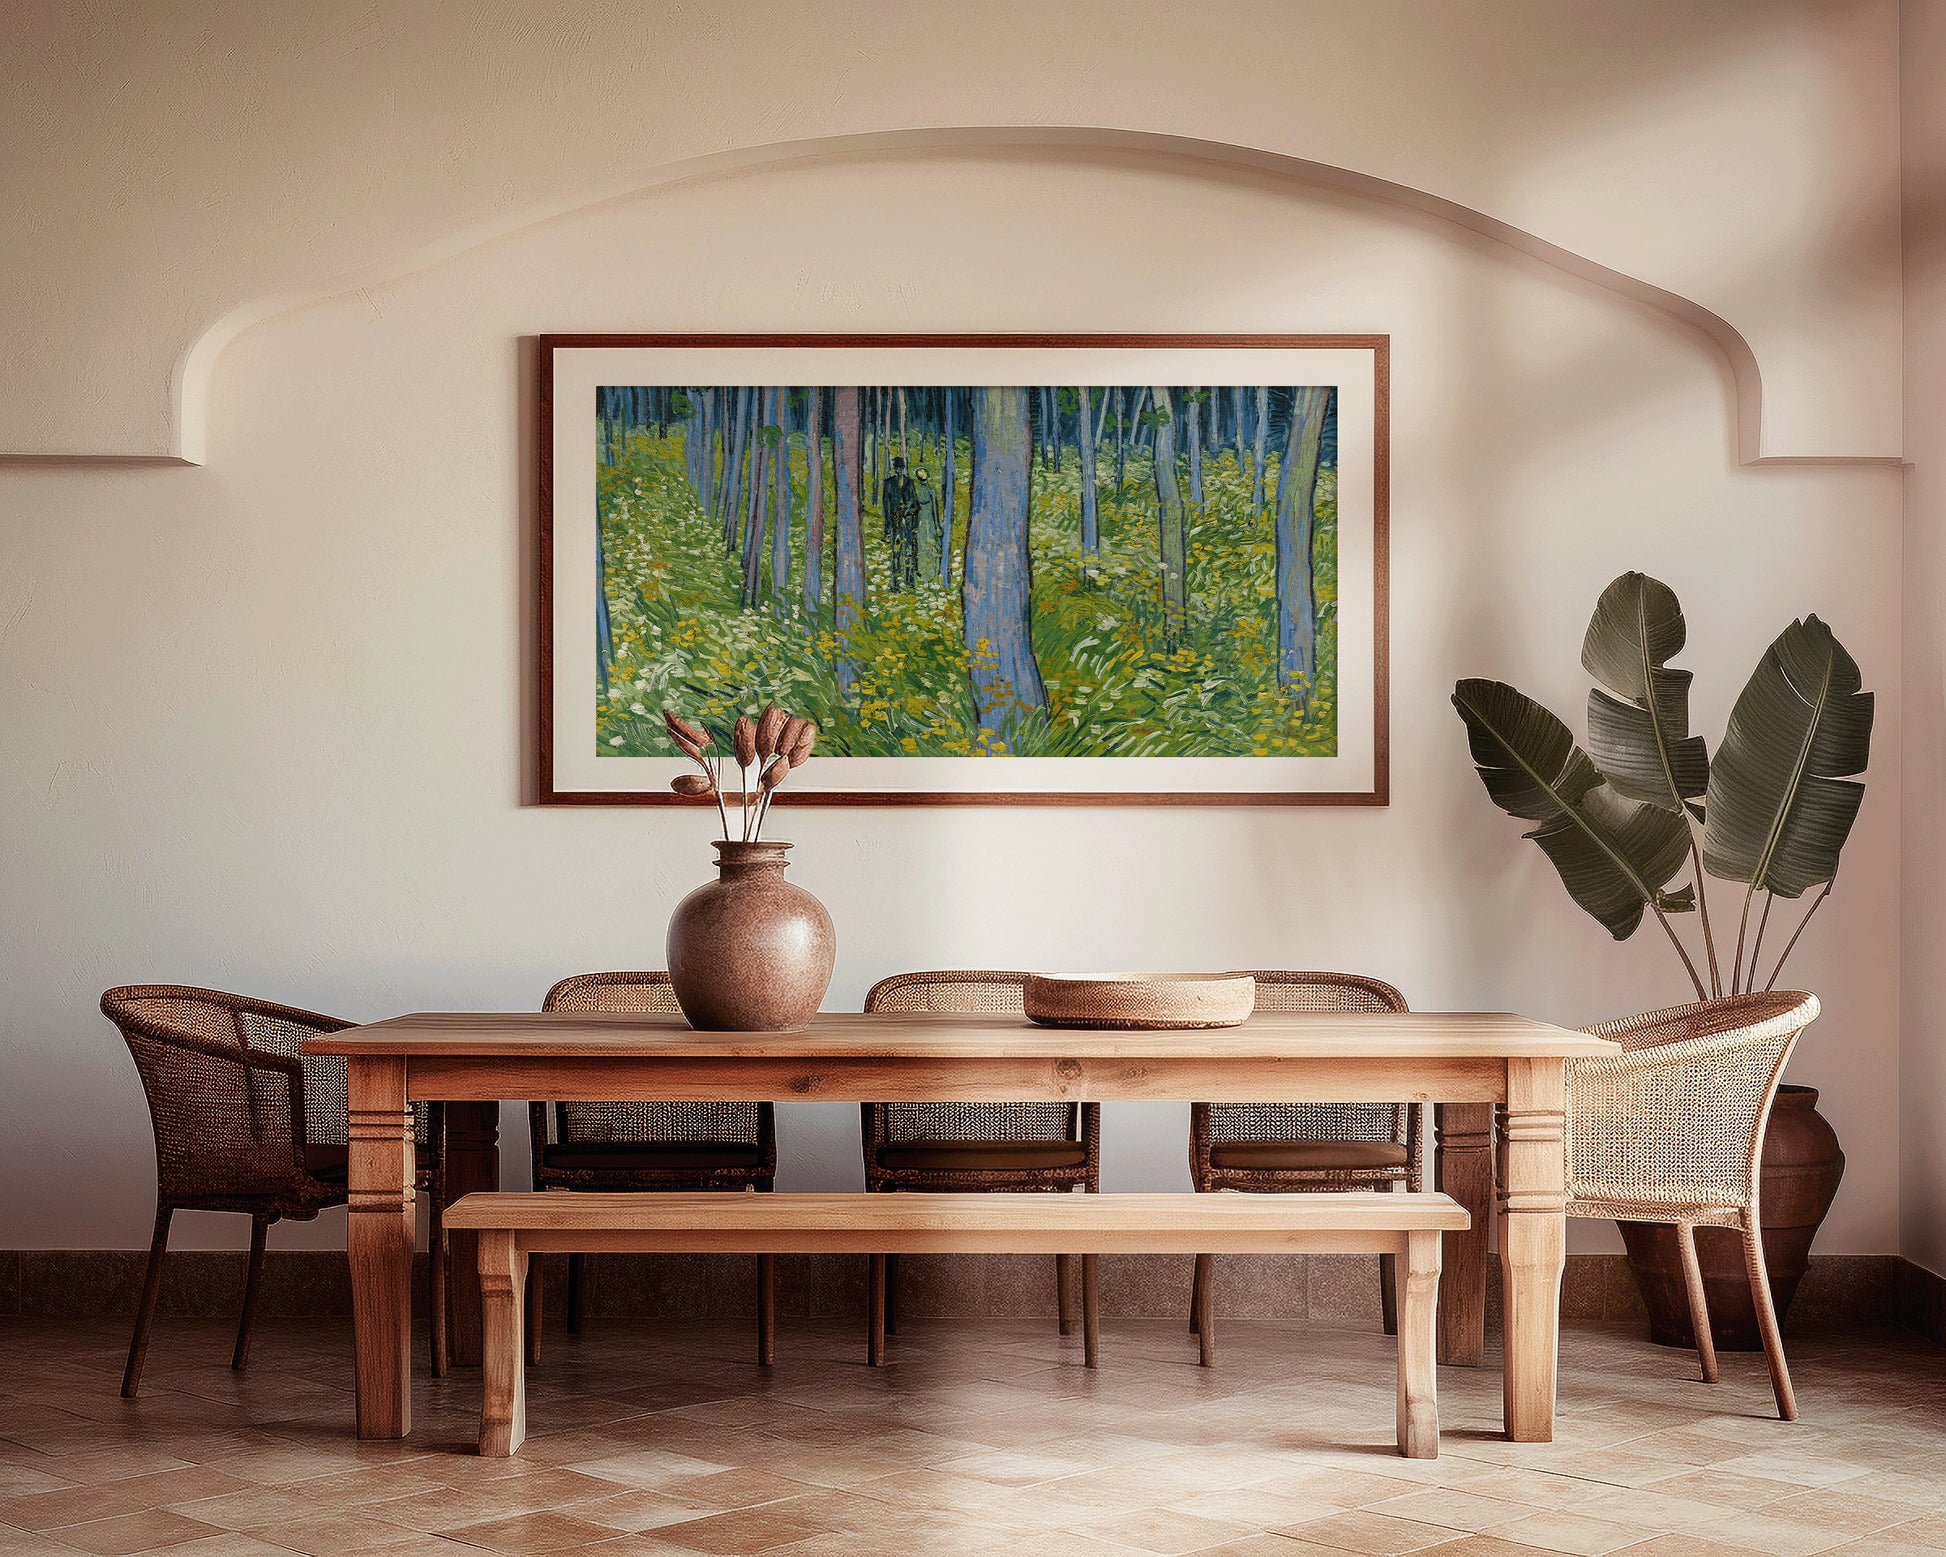 Vincent Van Gogh – Undergrowth with Two Figures | Vintage Impressionist Wide Panoramic Art (available framed or unframed)